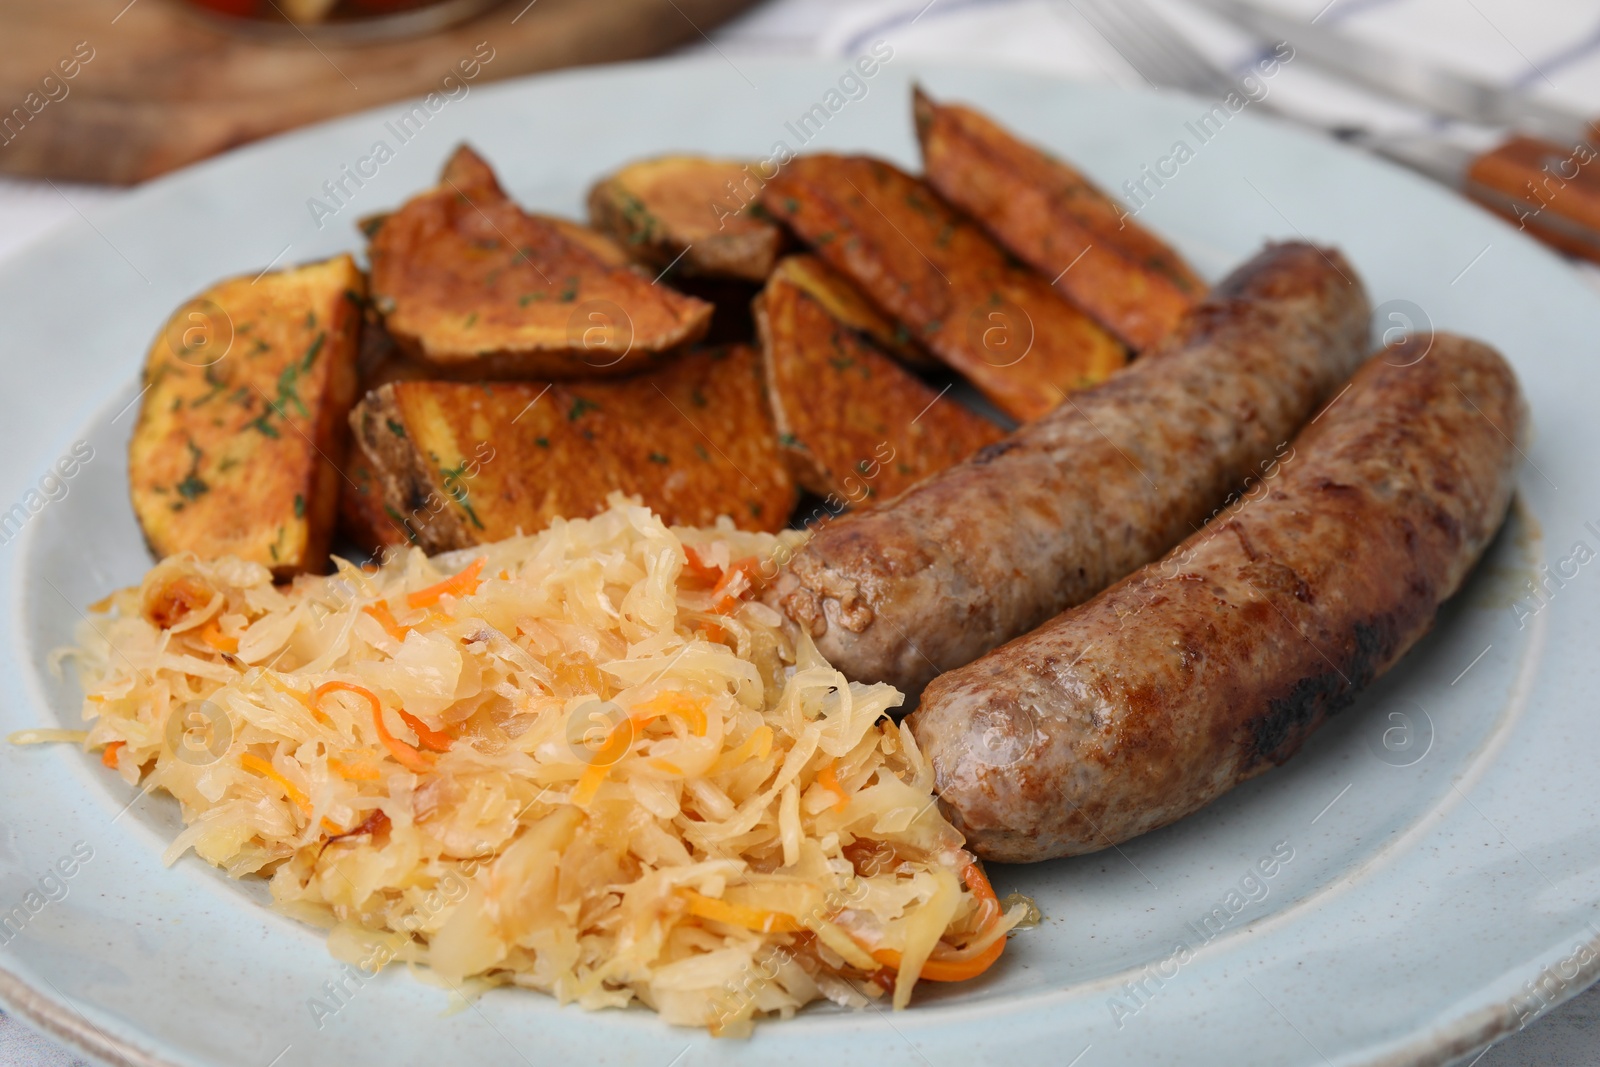 Photo of Plate with sauerkraut, sausages and potatoes on table, closeup